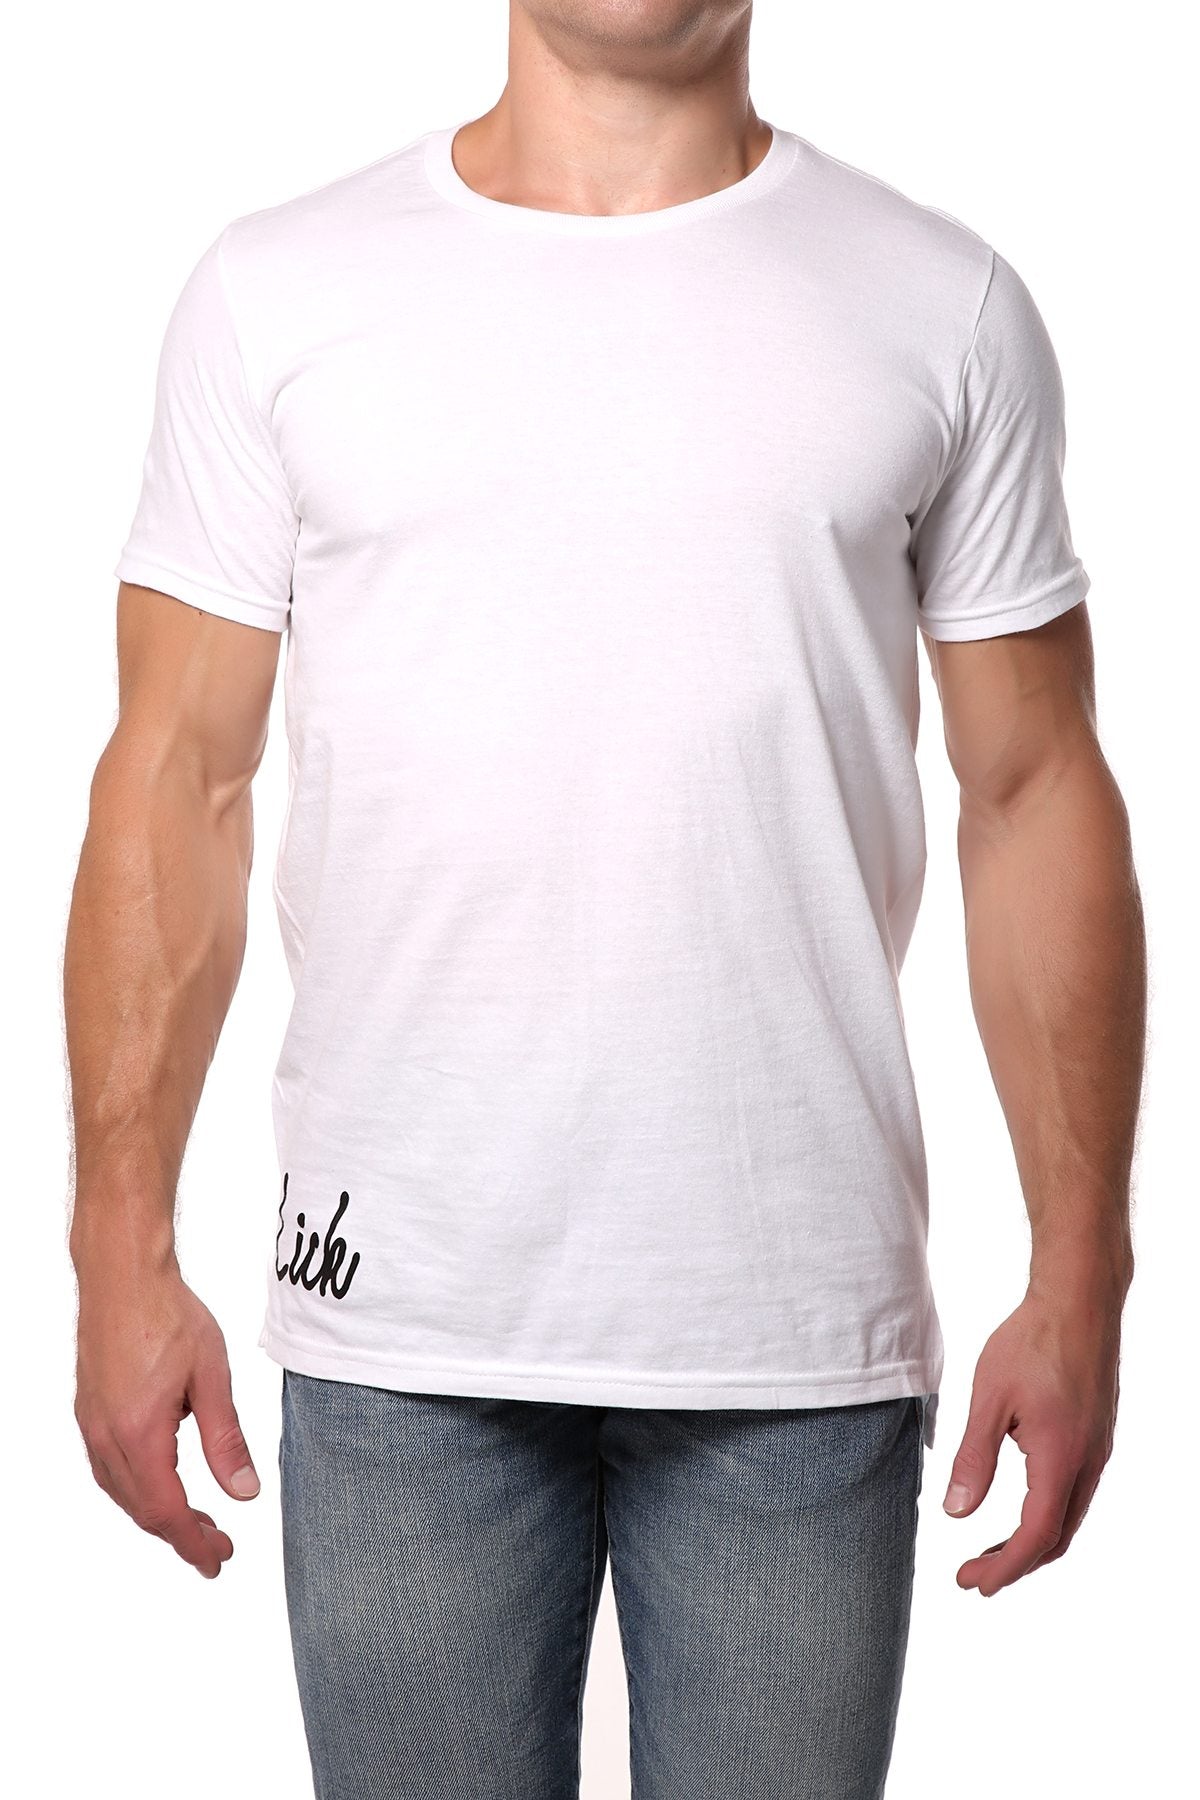 Lick White Long Cotton Graphic Tee